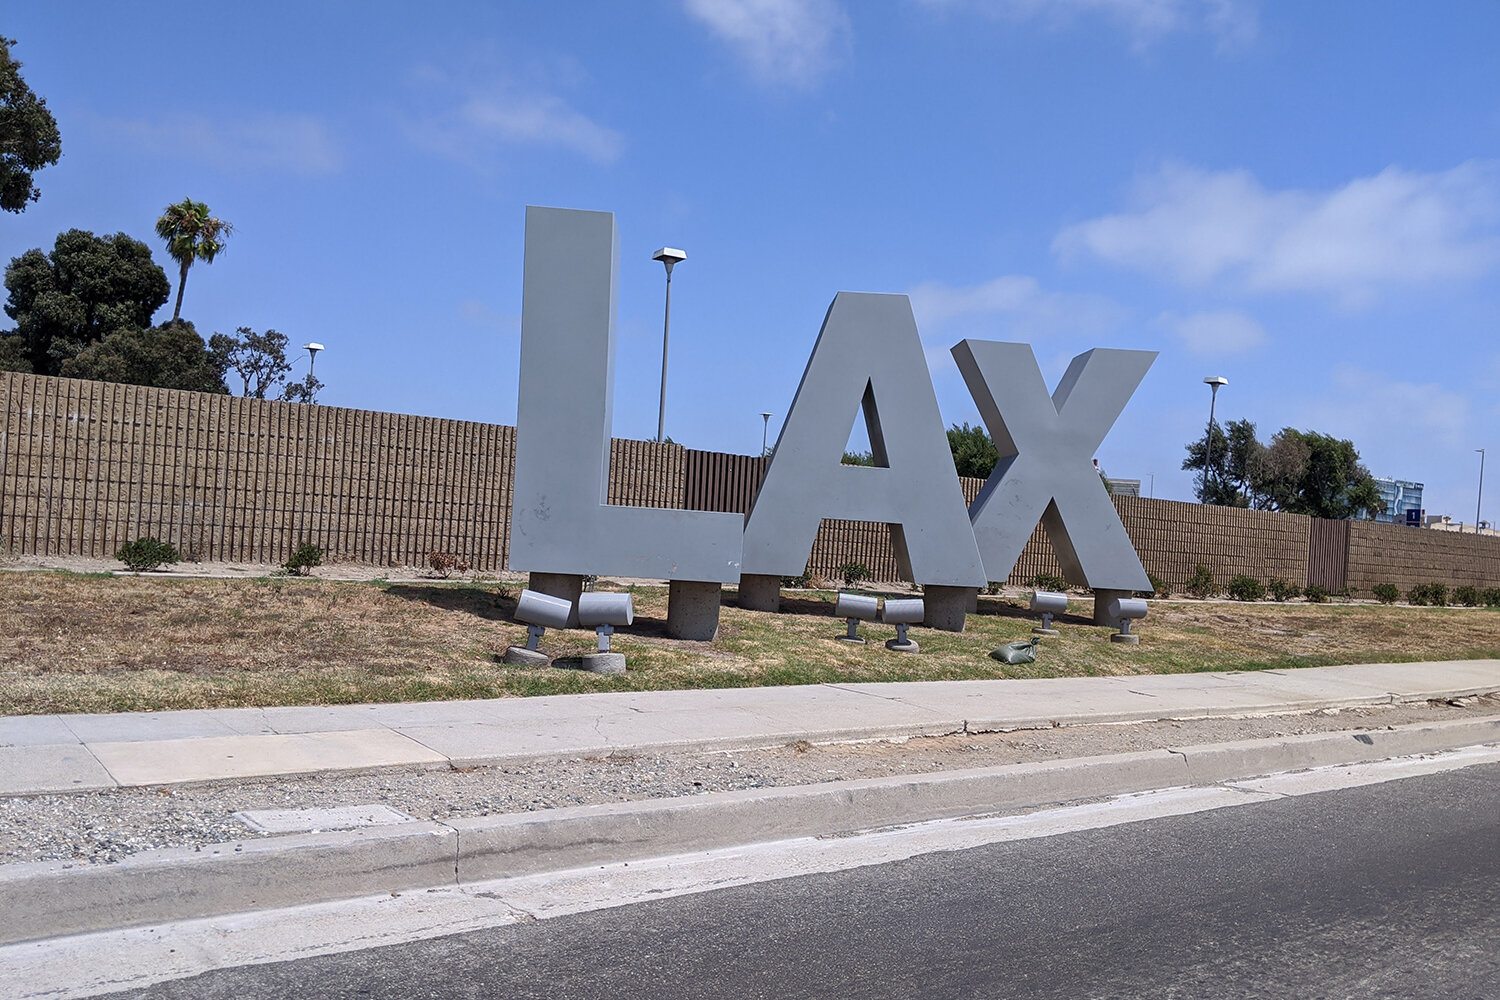 aldridge-electric-airport-infrastructure-systems-integration-transit-people-movers-lax.jpg